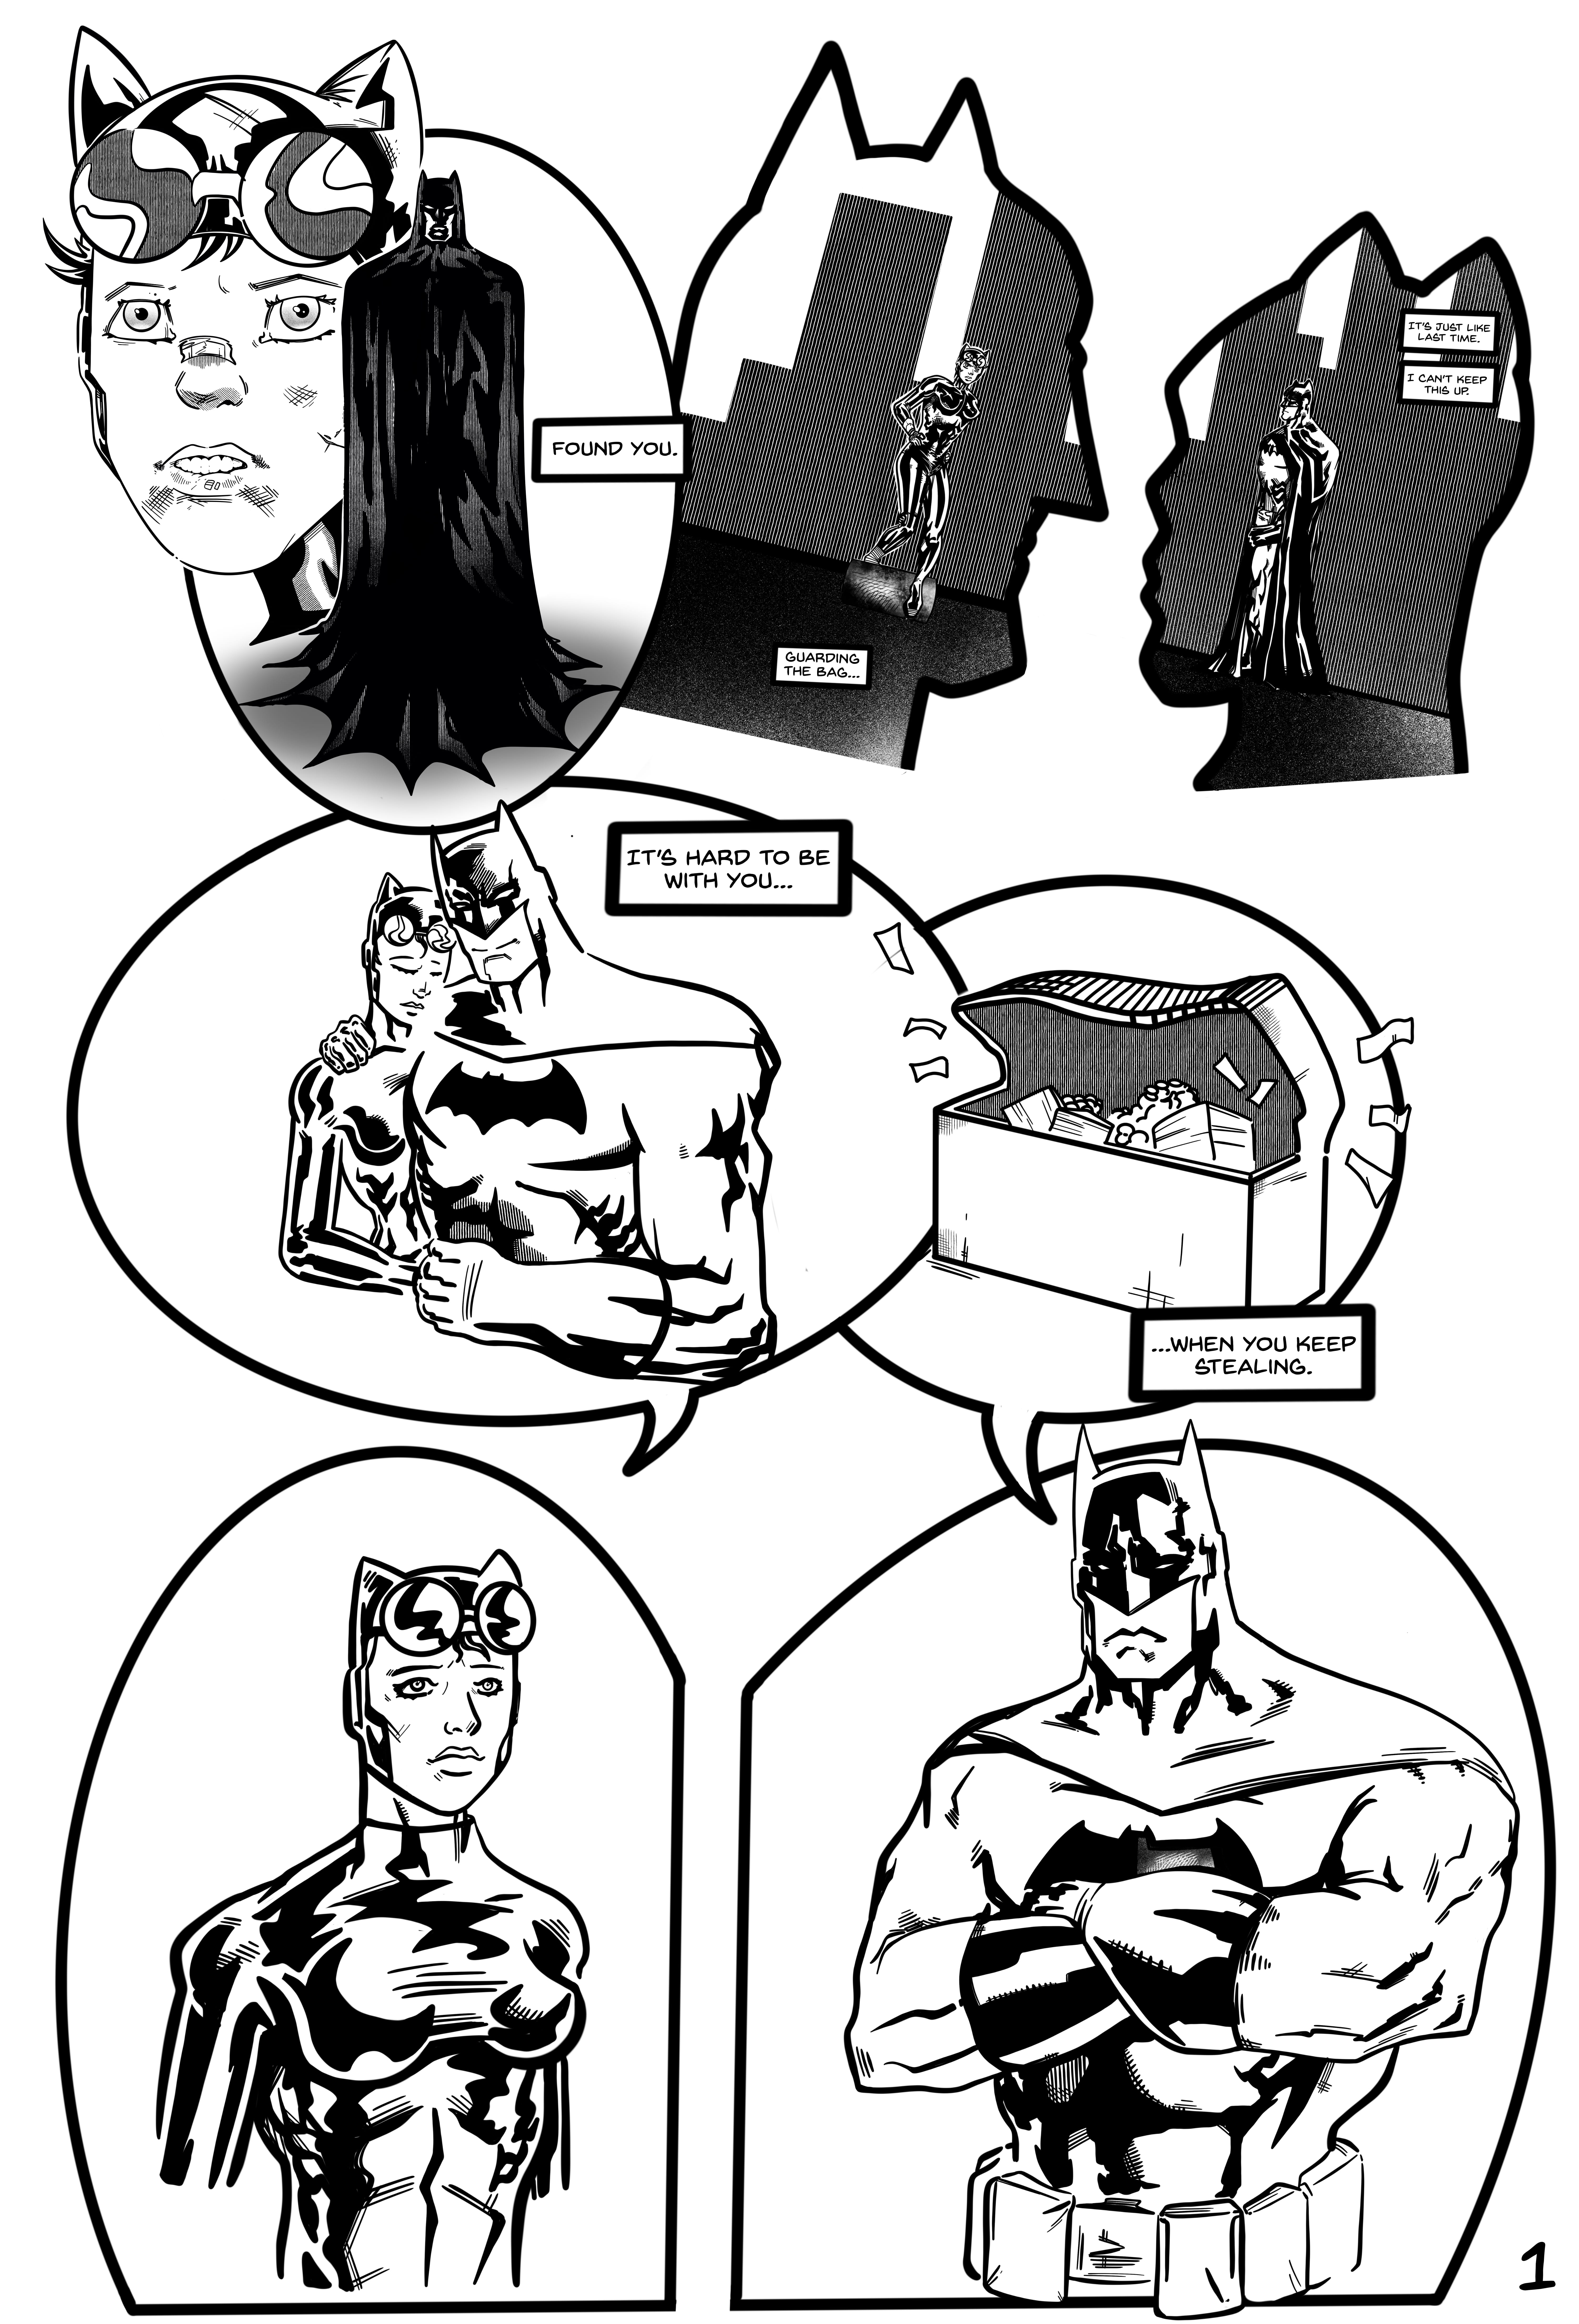 S. Miller - Comic Page 1 - Batman talks to Catwoman about how it is hard to be with each other when she keeps stealing.